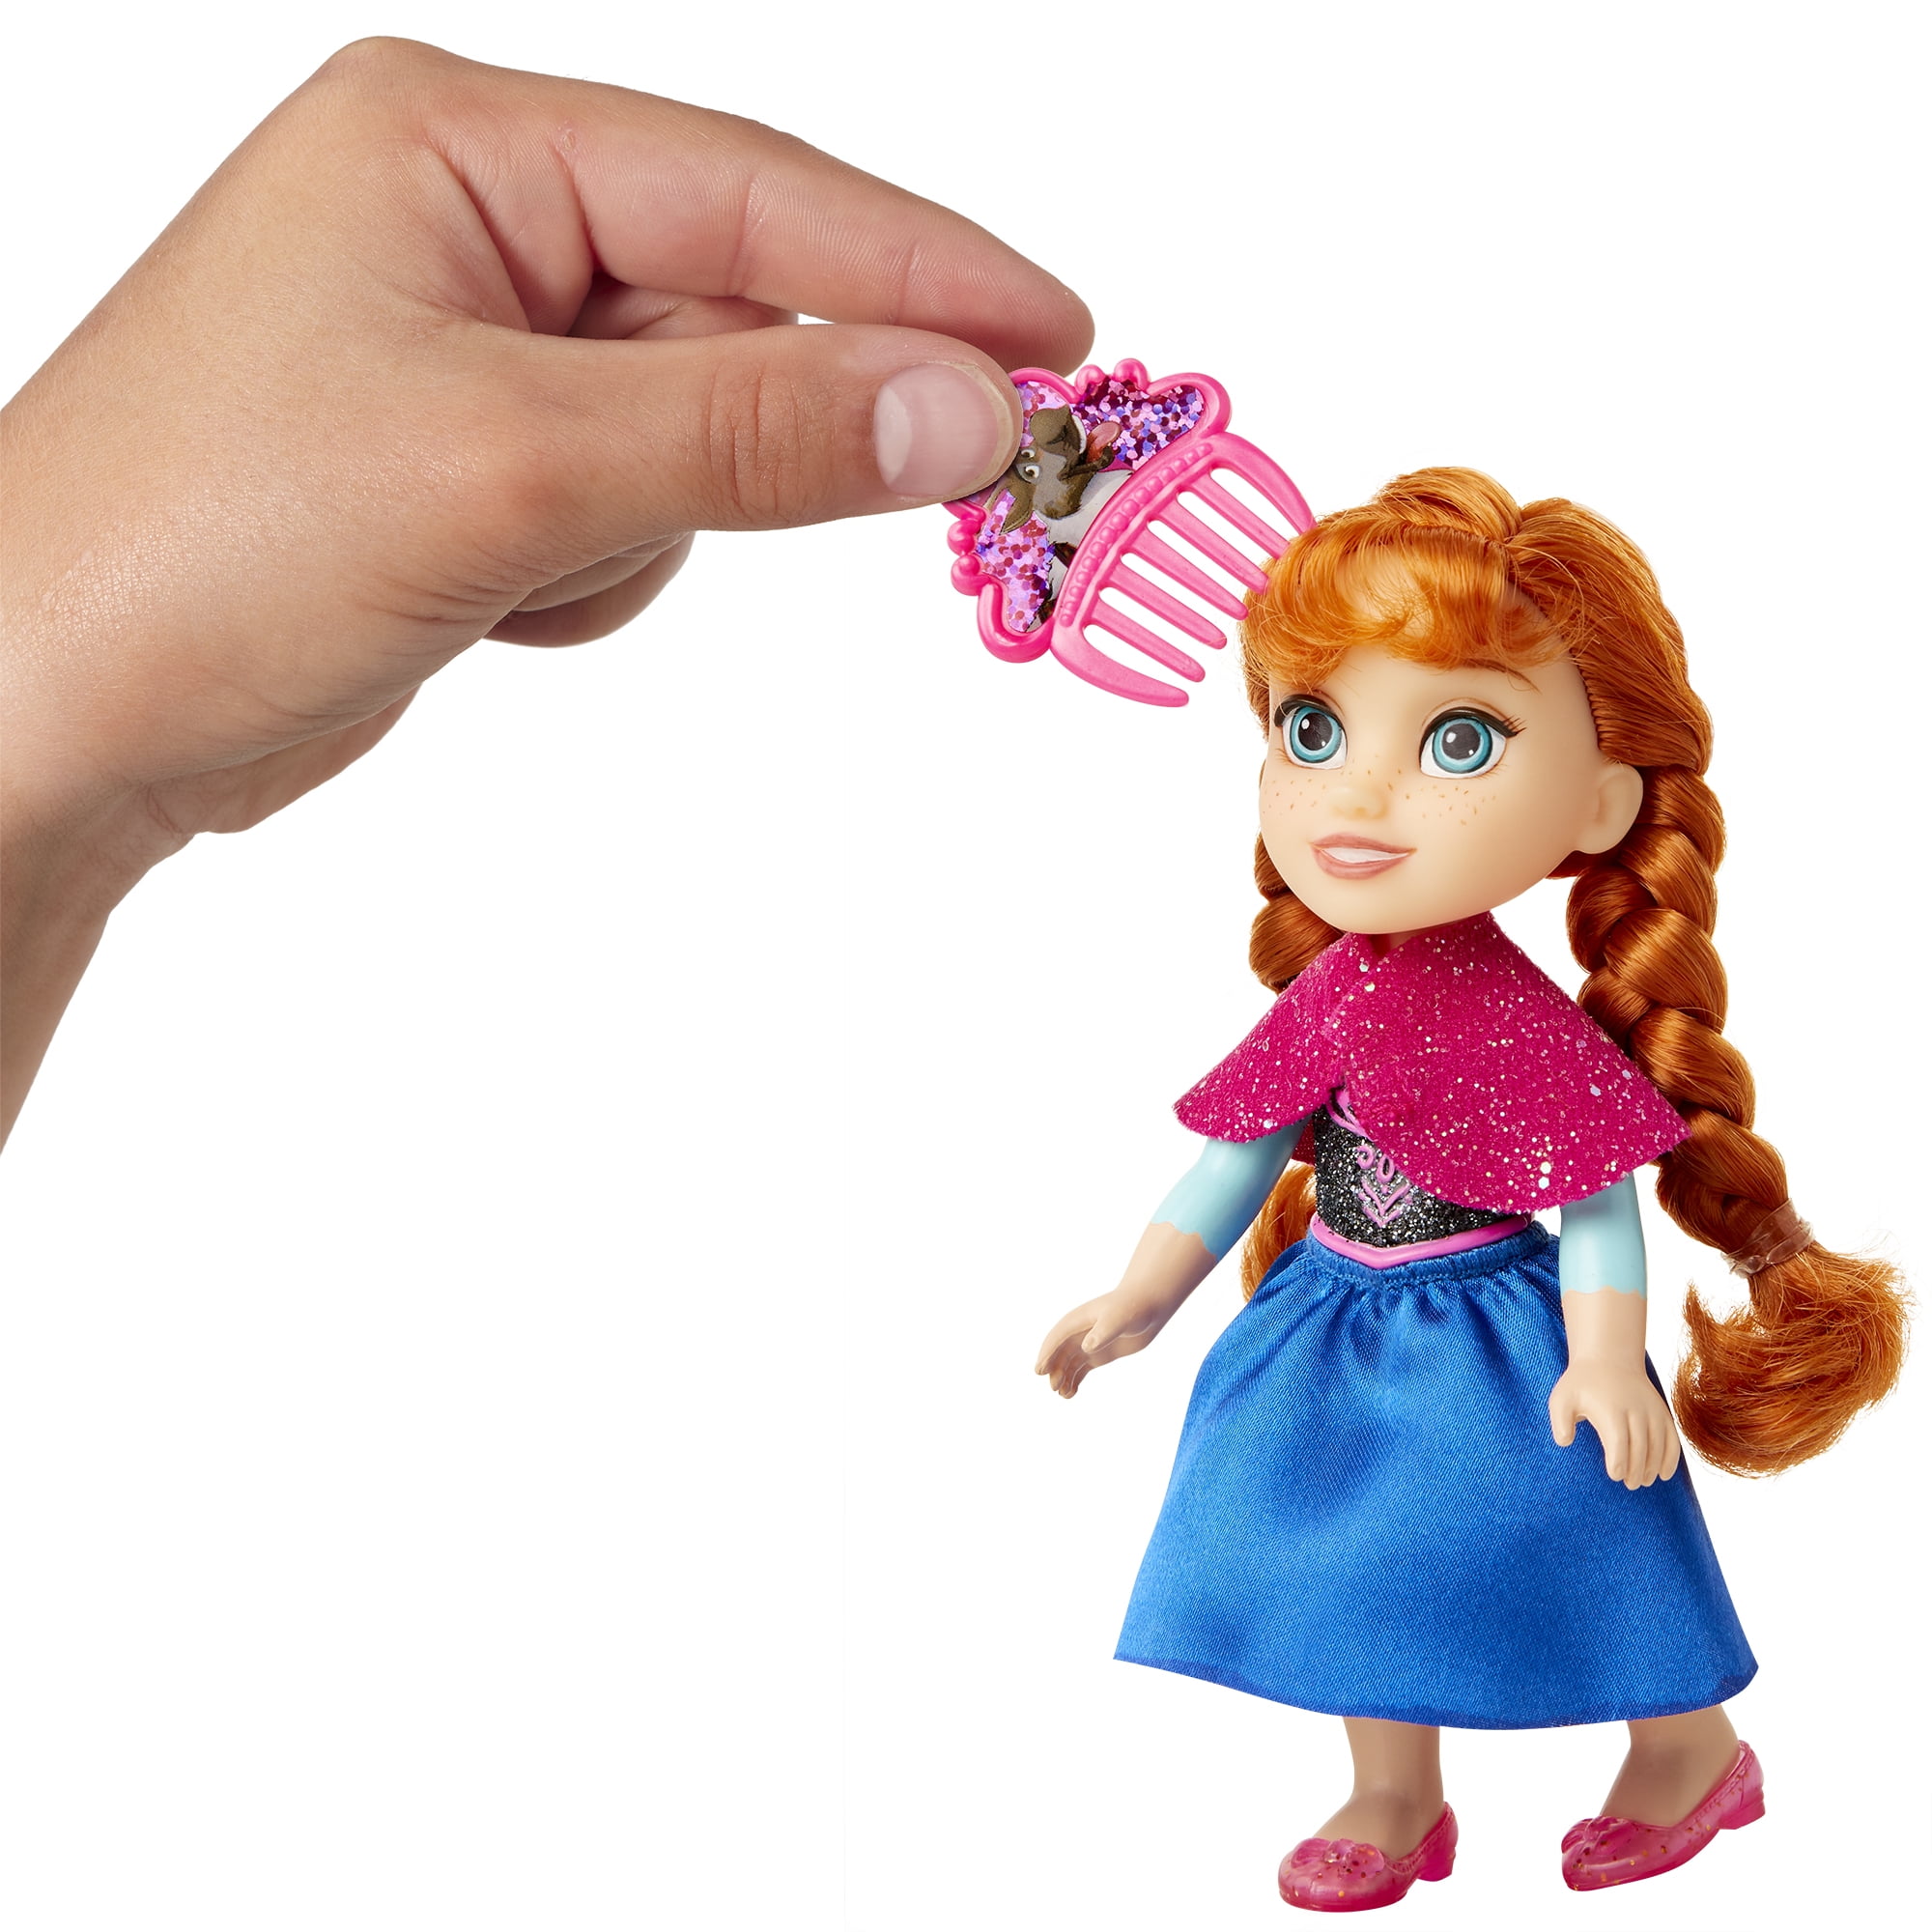 Disney Frozen Princess Anna 6 in Petite Doll With Glittered Hard Bodice and Comb for sale online 